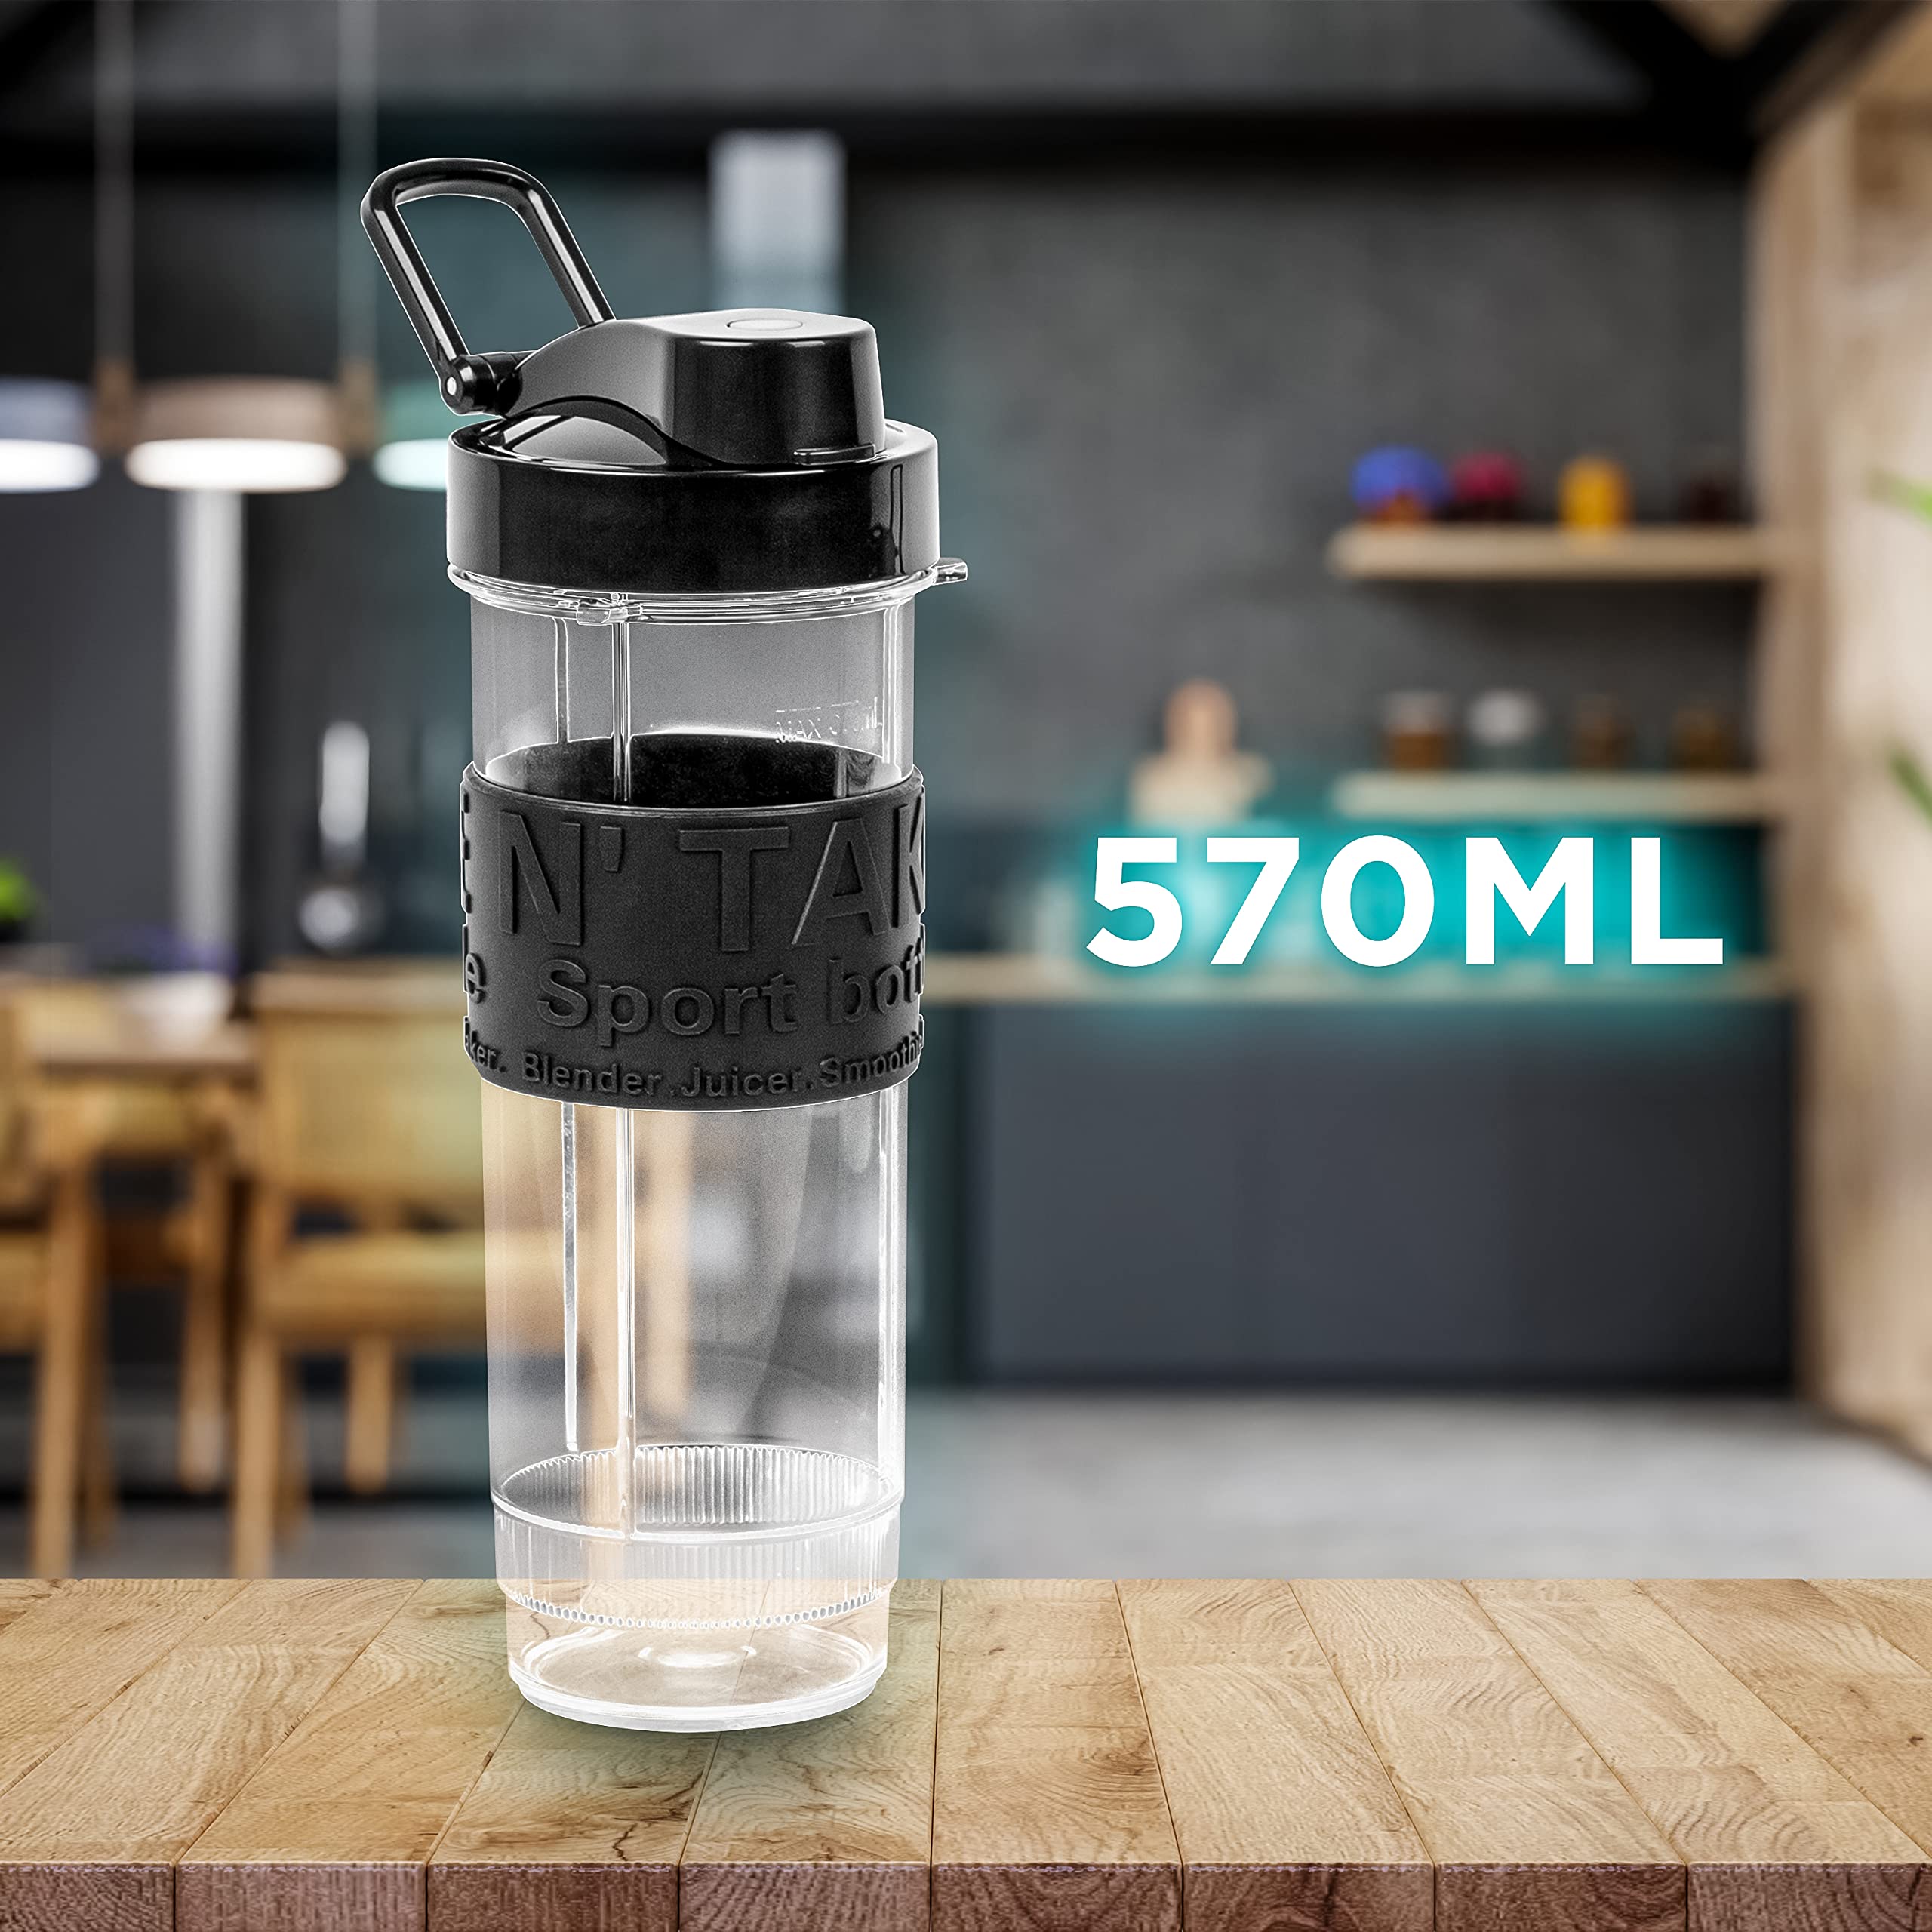 Duronic Blender Spare Bottle 570ml BB5, 570ml Water Bottle For Duronic BL530 and BL540 Blenders Only, BPA Free, Ideal for Camping, Gym, Travel, Hiking - Large